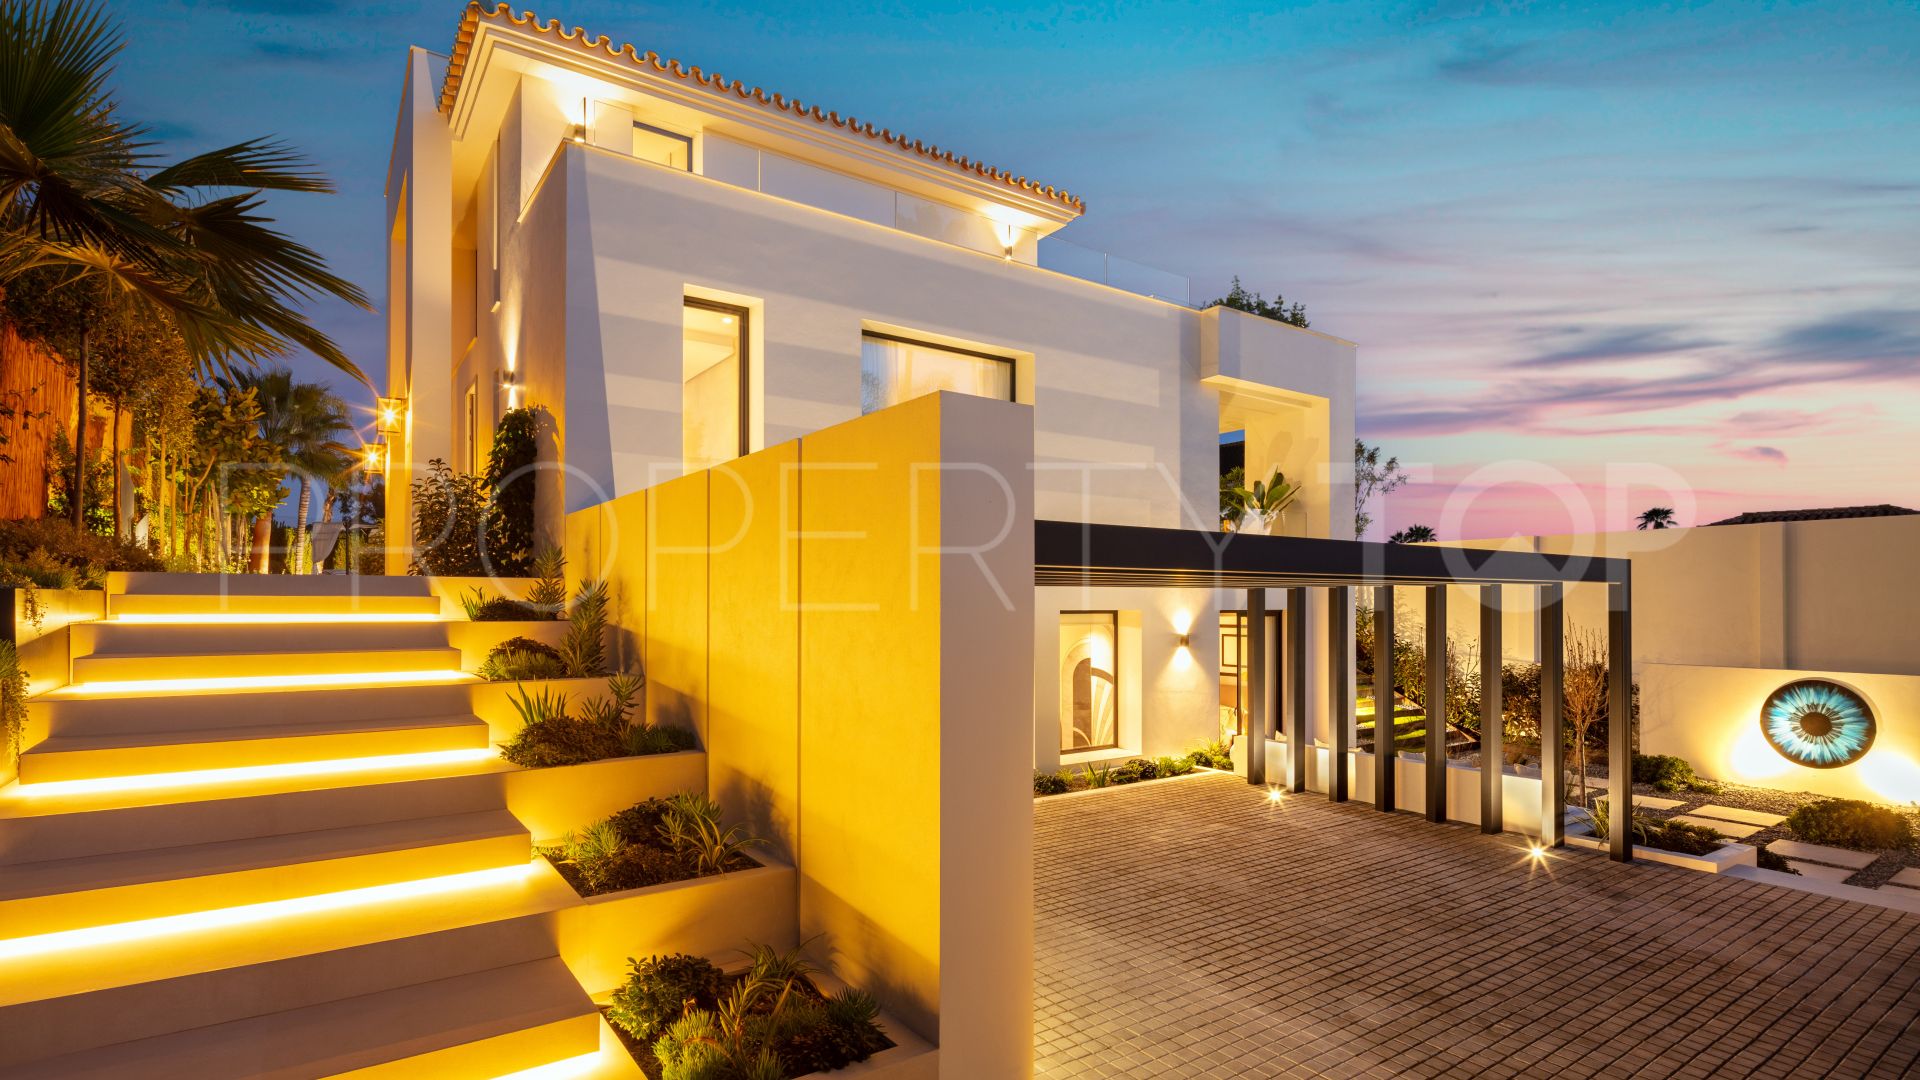 For sale villa with 4 bedrooms in Supermanzana H